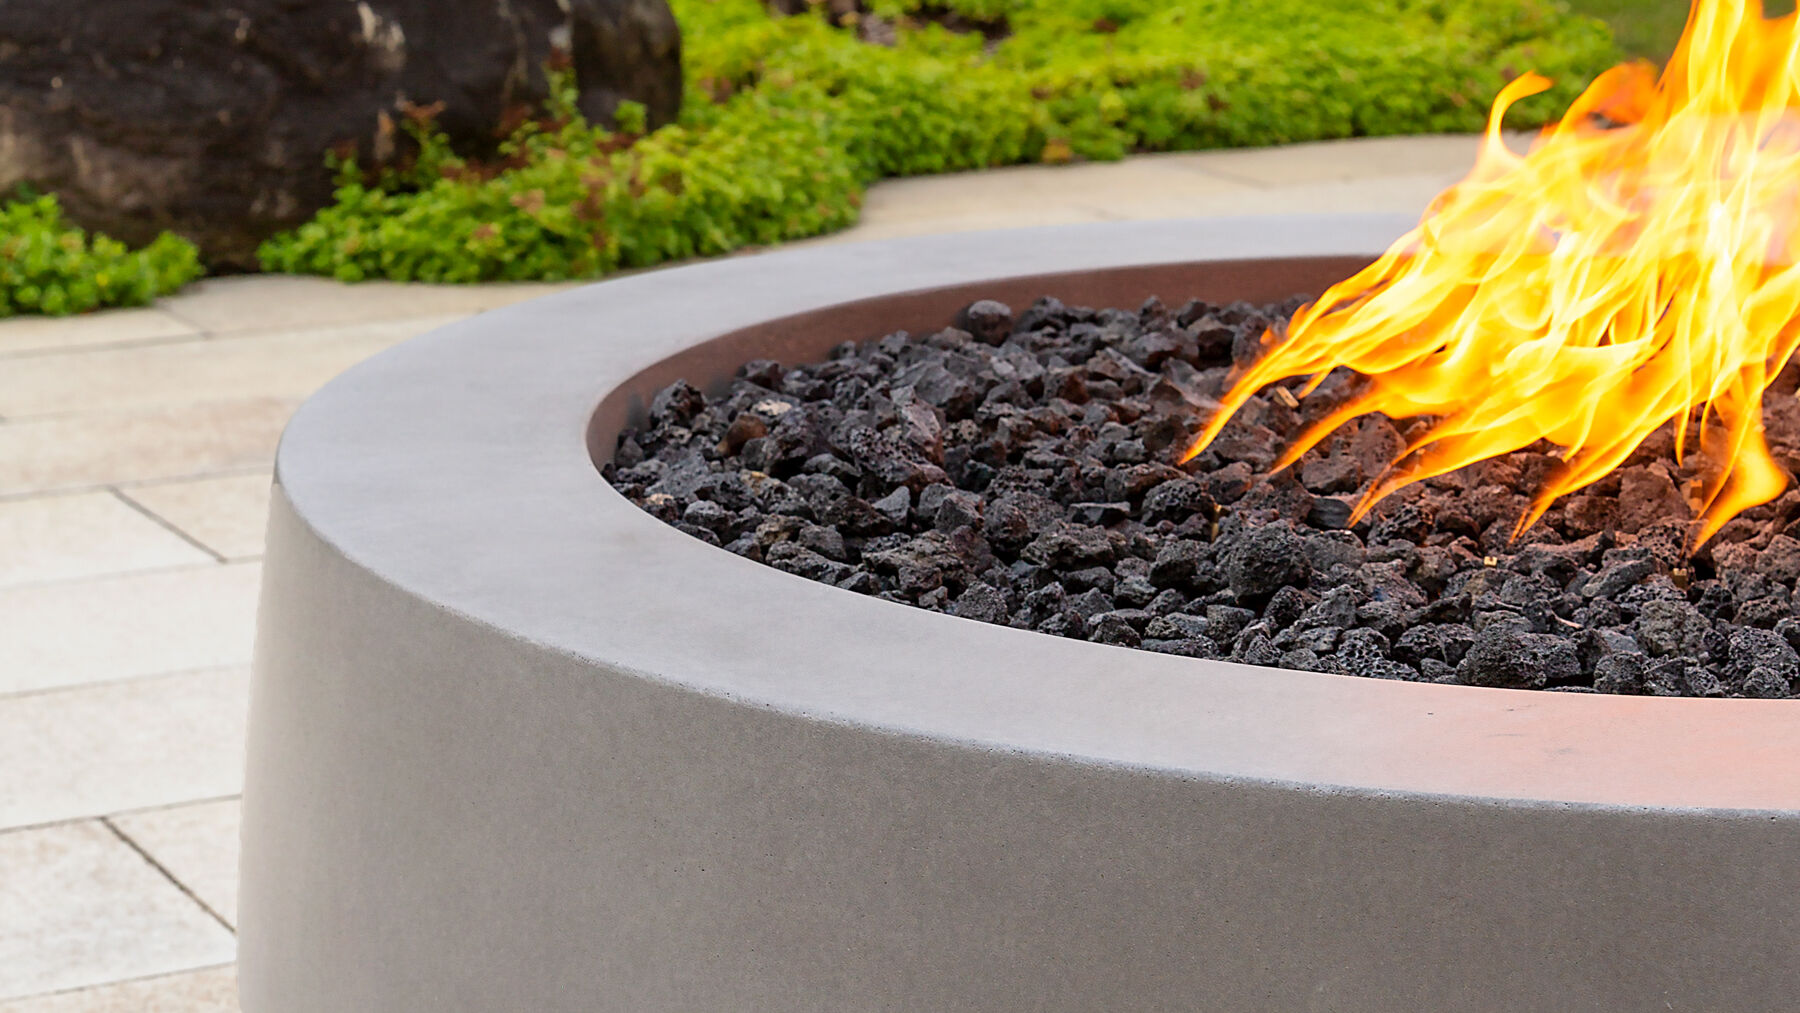 A close-up view of a gray Tondo gas fire pit from Flamecraft with black lava rock fire media.